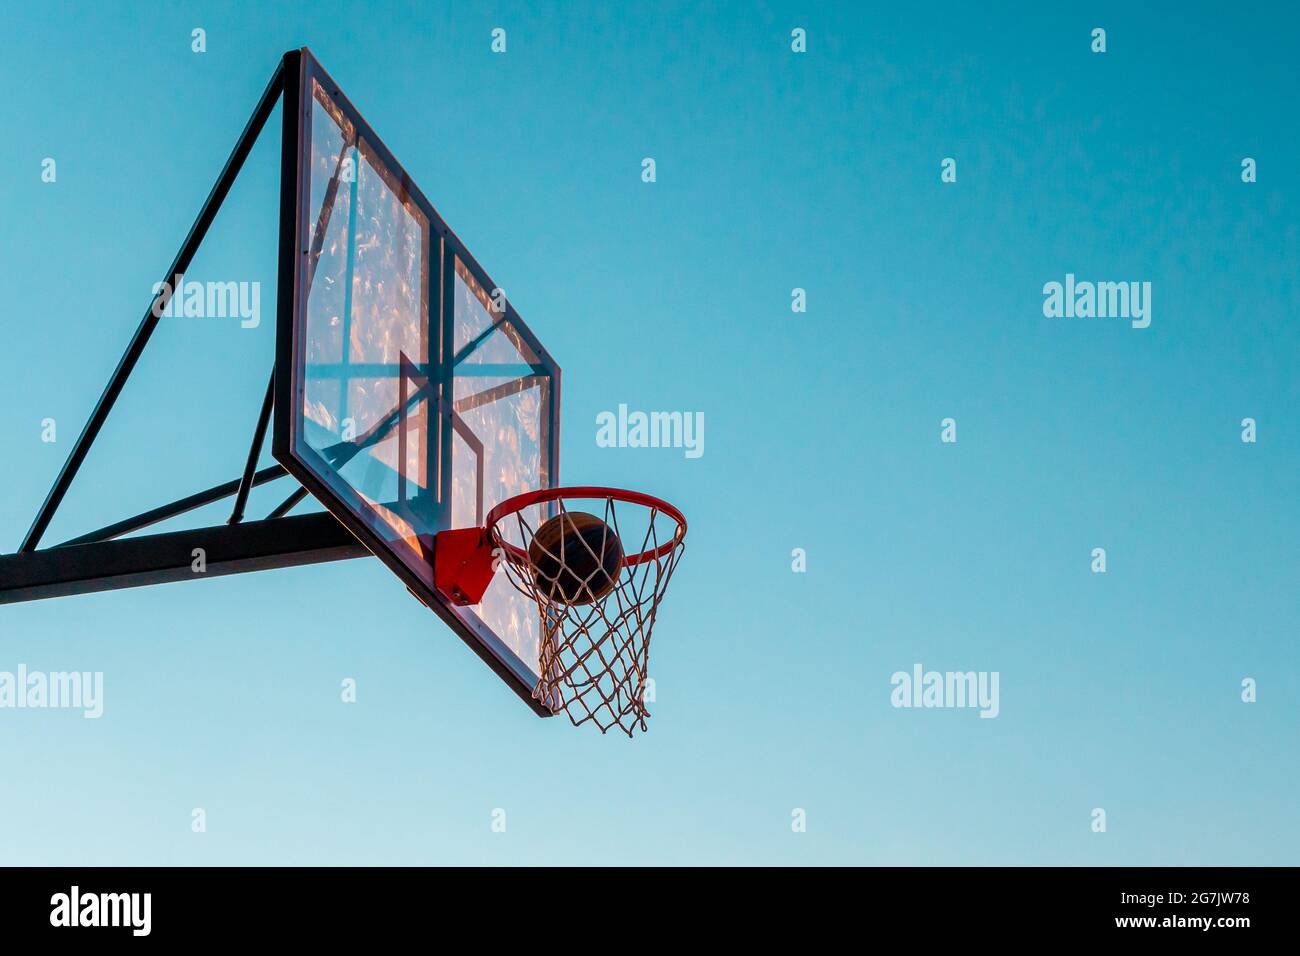 A basketball basket with a ball on a blue sky background. Transparent plastic basketball shield on the outdoor basketball court. Stock Photo